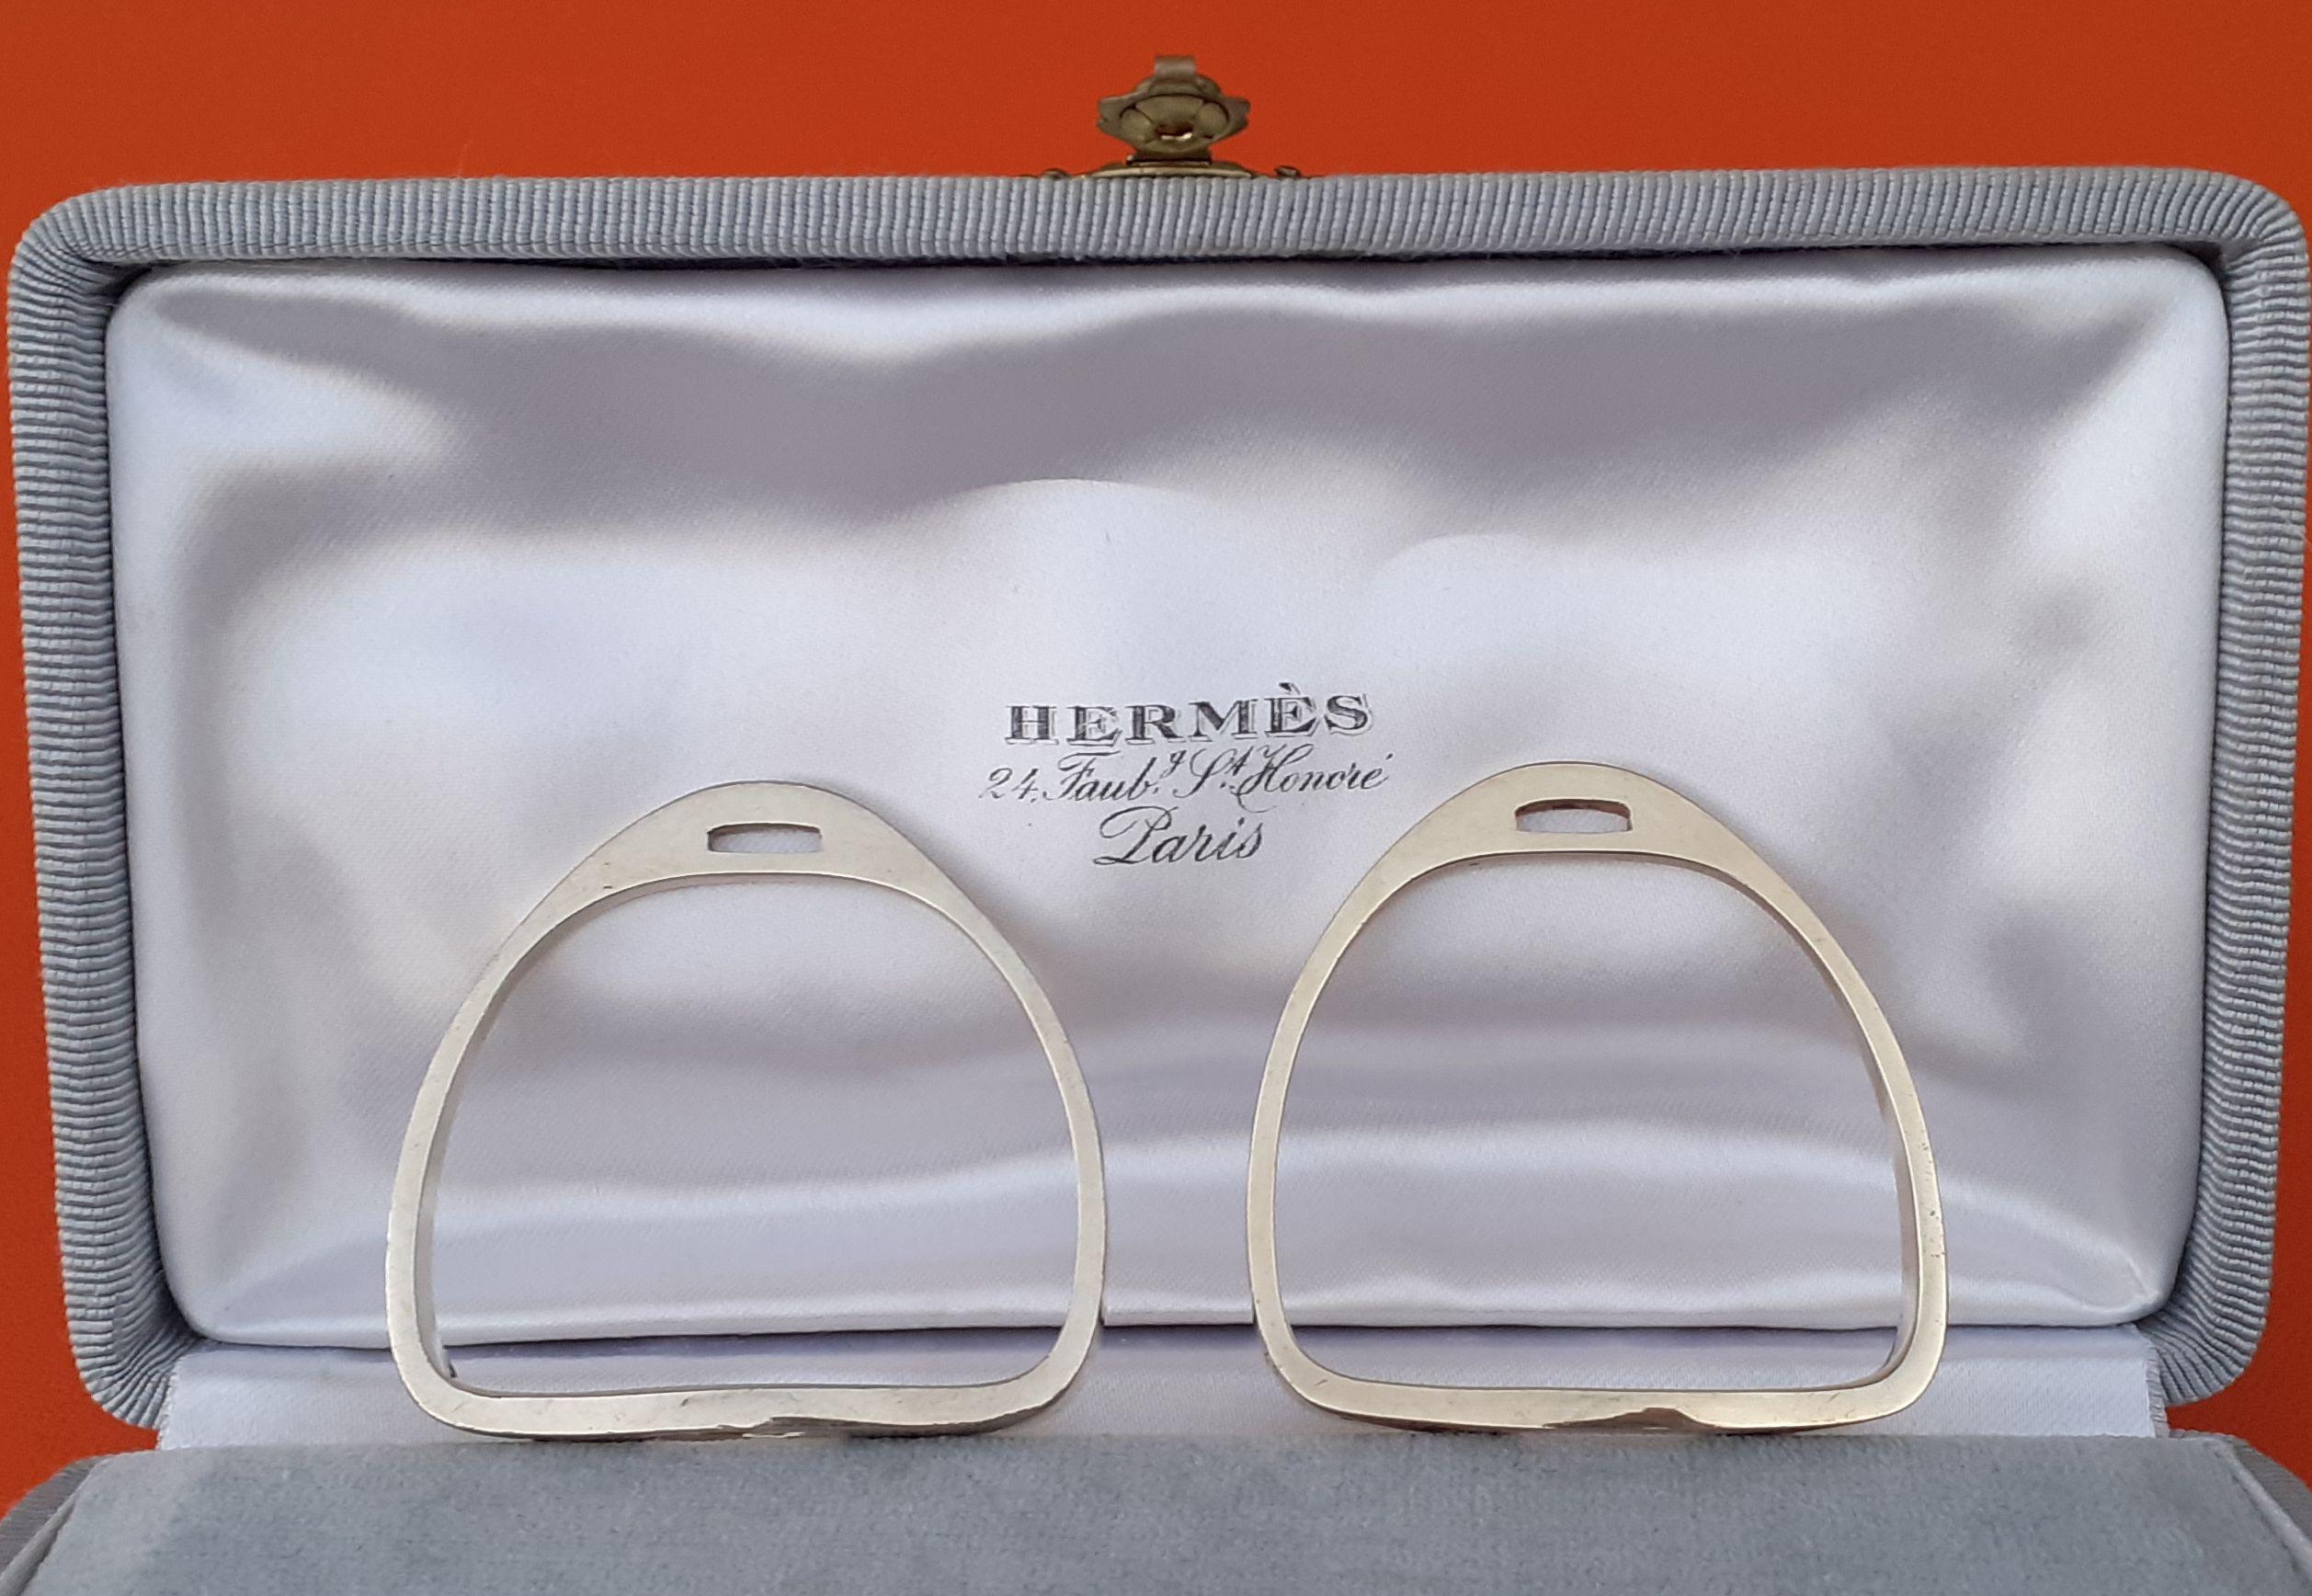 Exceptional Hermès Set of 2 Napkin Rings Stirrups Shaped in Silver-Gilt Texas For Sale 3